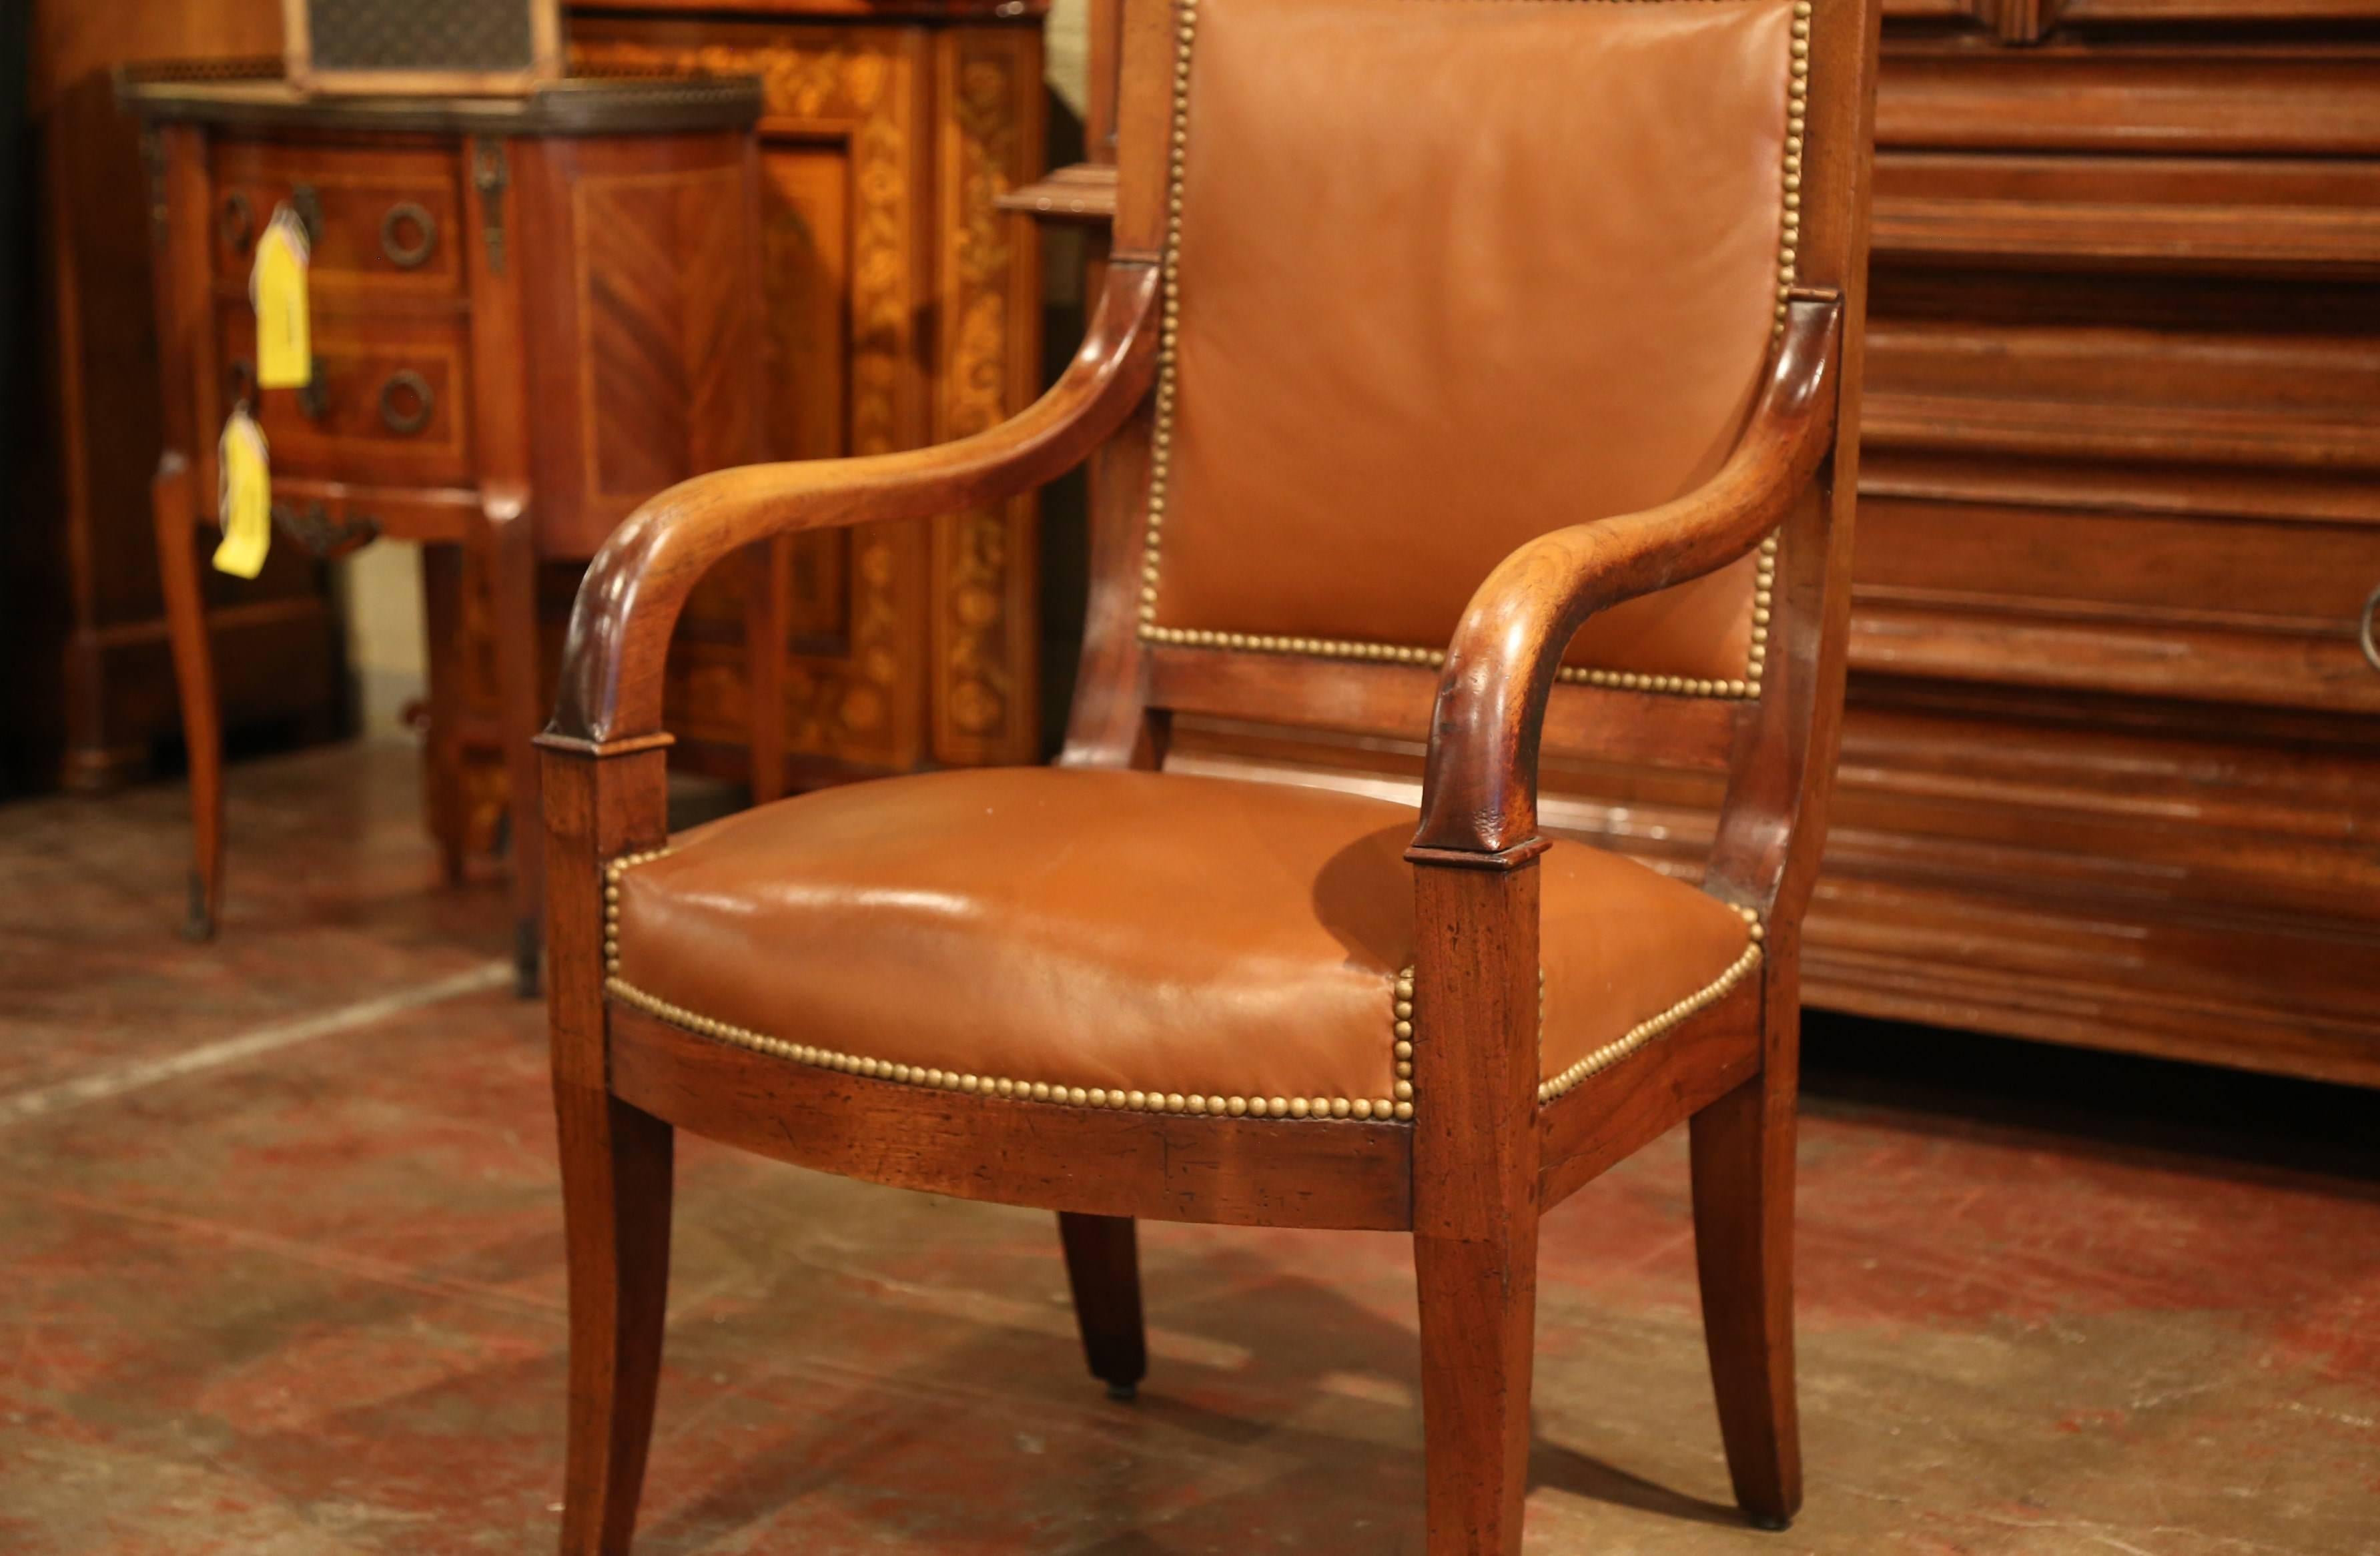 This elegant antique fruitwood armchair was crafted in Paris, France, circa 1850, the comfortable desk chair stands on curved legs, it features a square back and curved armrests. The armchair is upholstered with the original patinated light brown